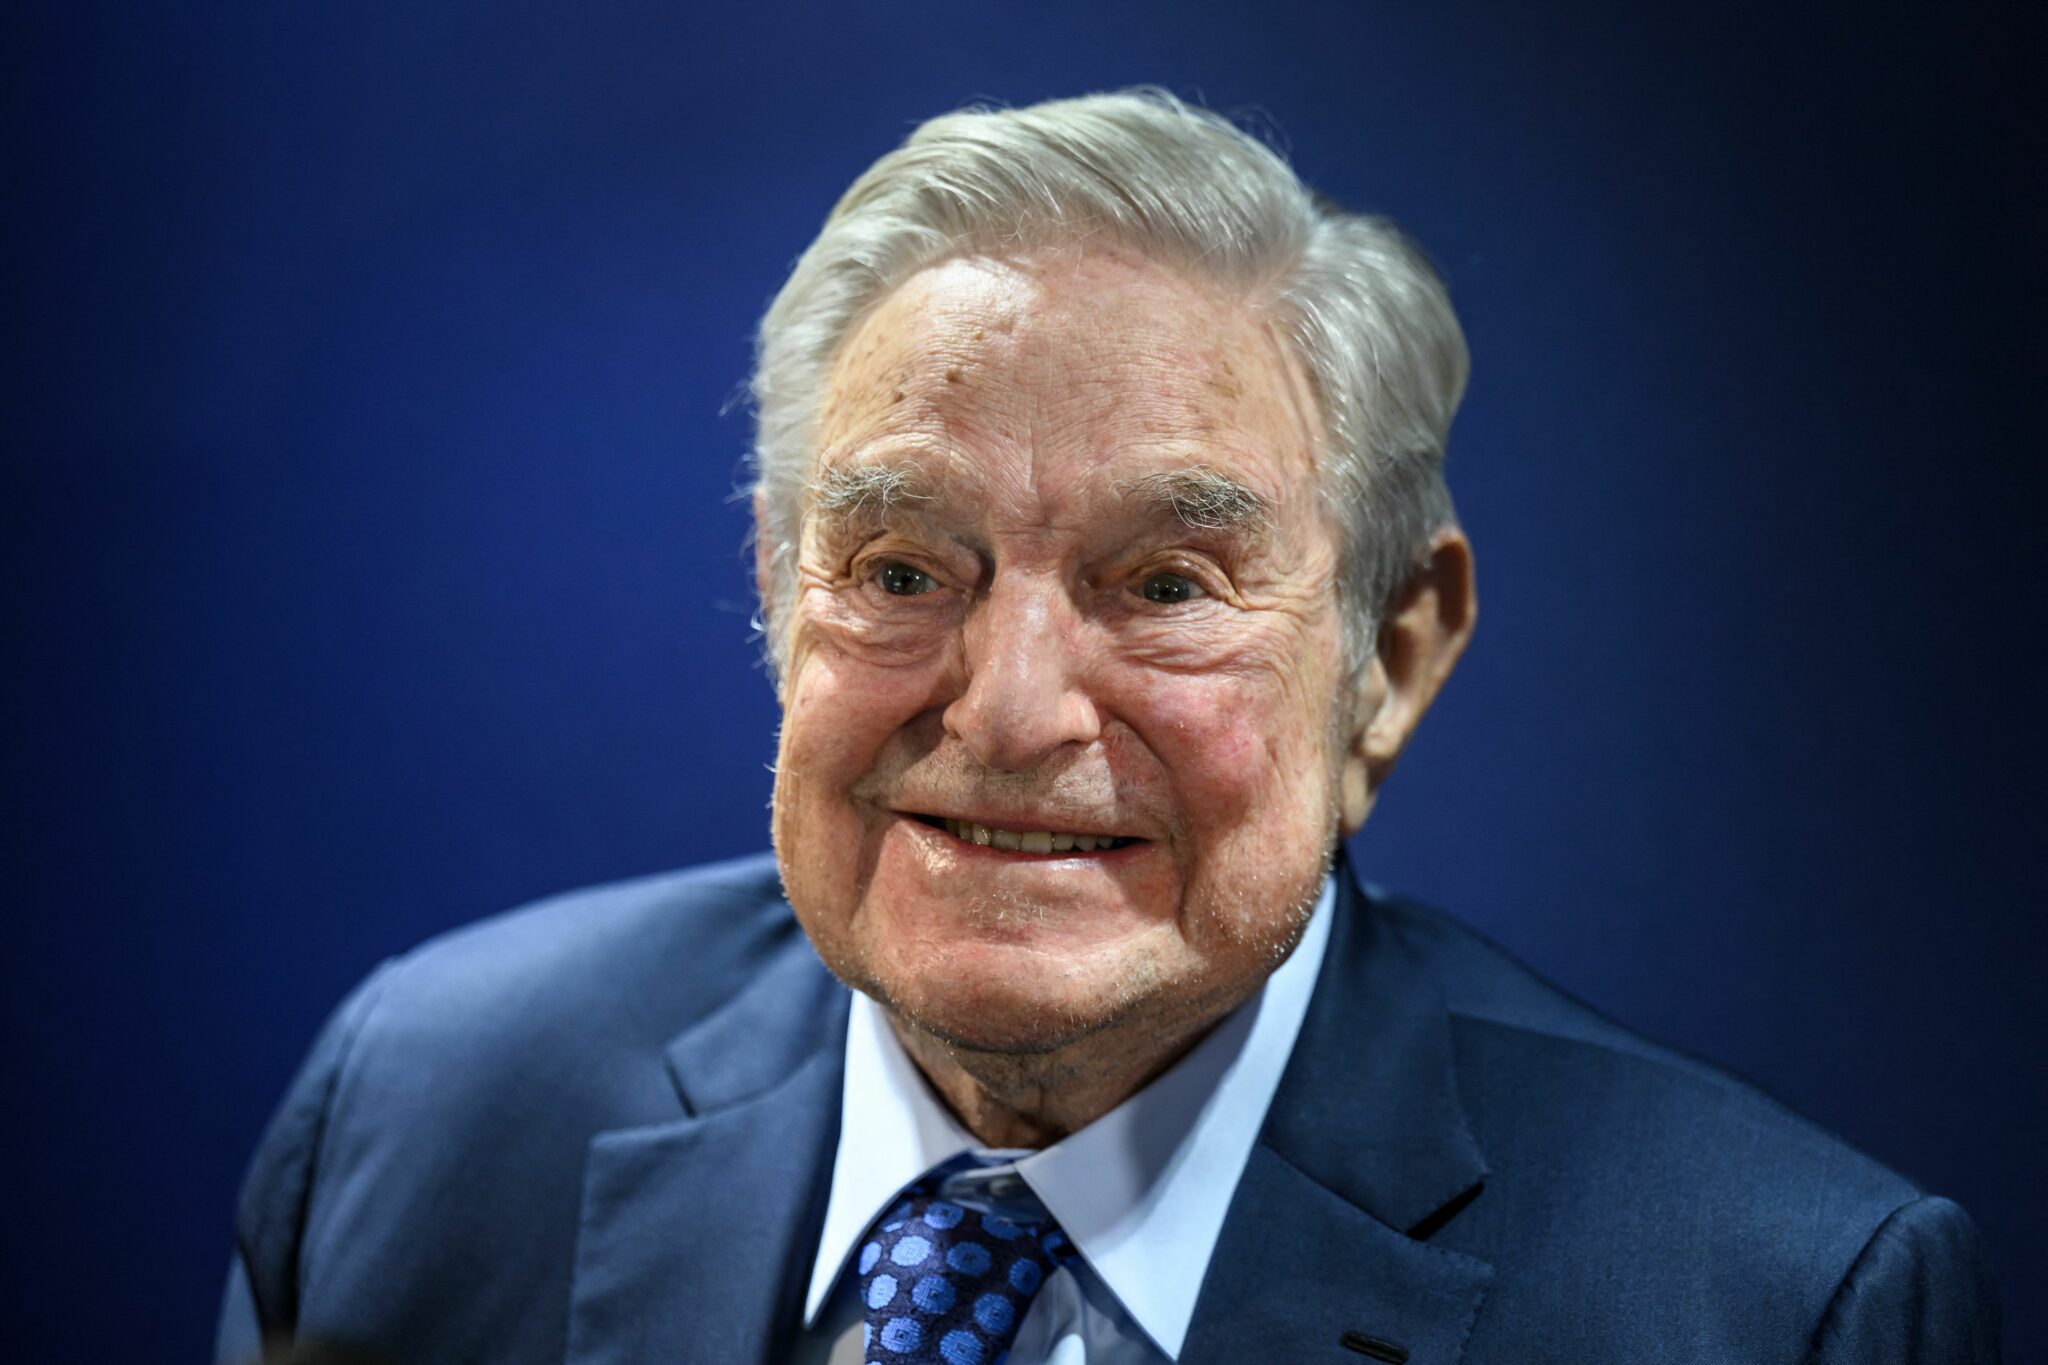 Hungarian-born US investor and philanthropist George Soros smiles after delivering a speech on the sidelines of the World Economic Forum (WEF) annual meeting in Davos on May 24, 2022. (Photo by Fabrice COFFRINI / AFP) (Photo by FABRICE COFFRINI/AFP via Getty Images)